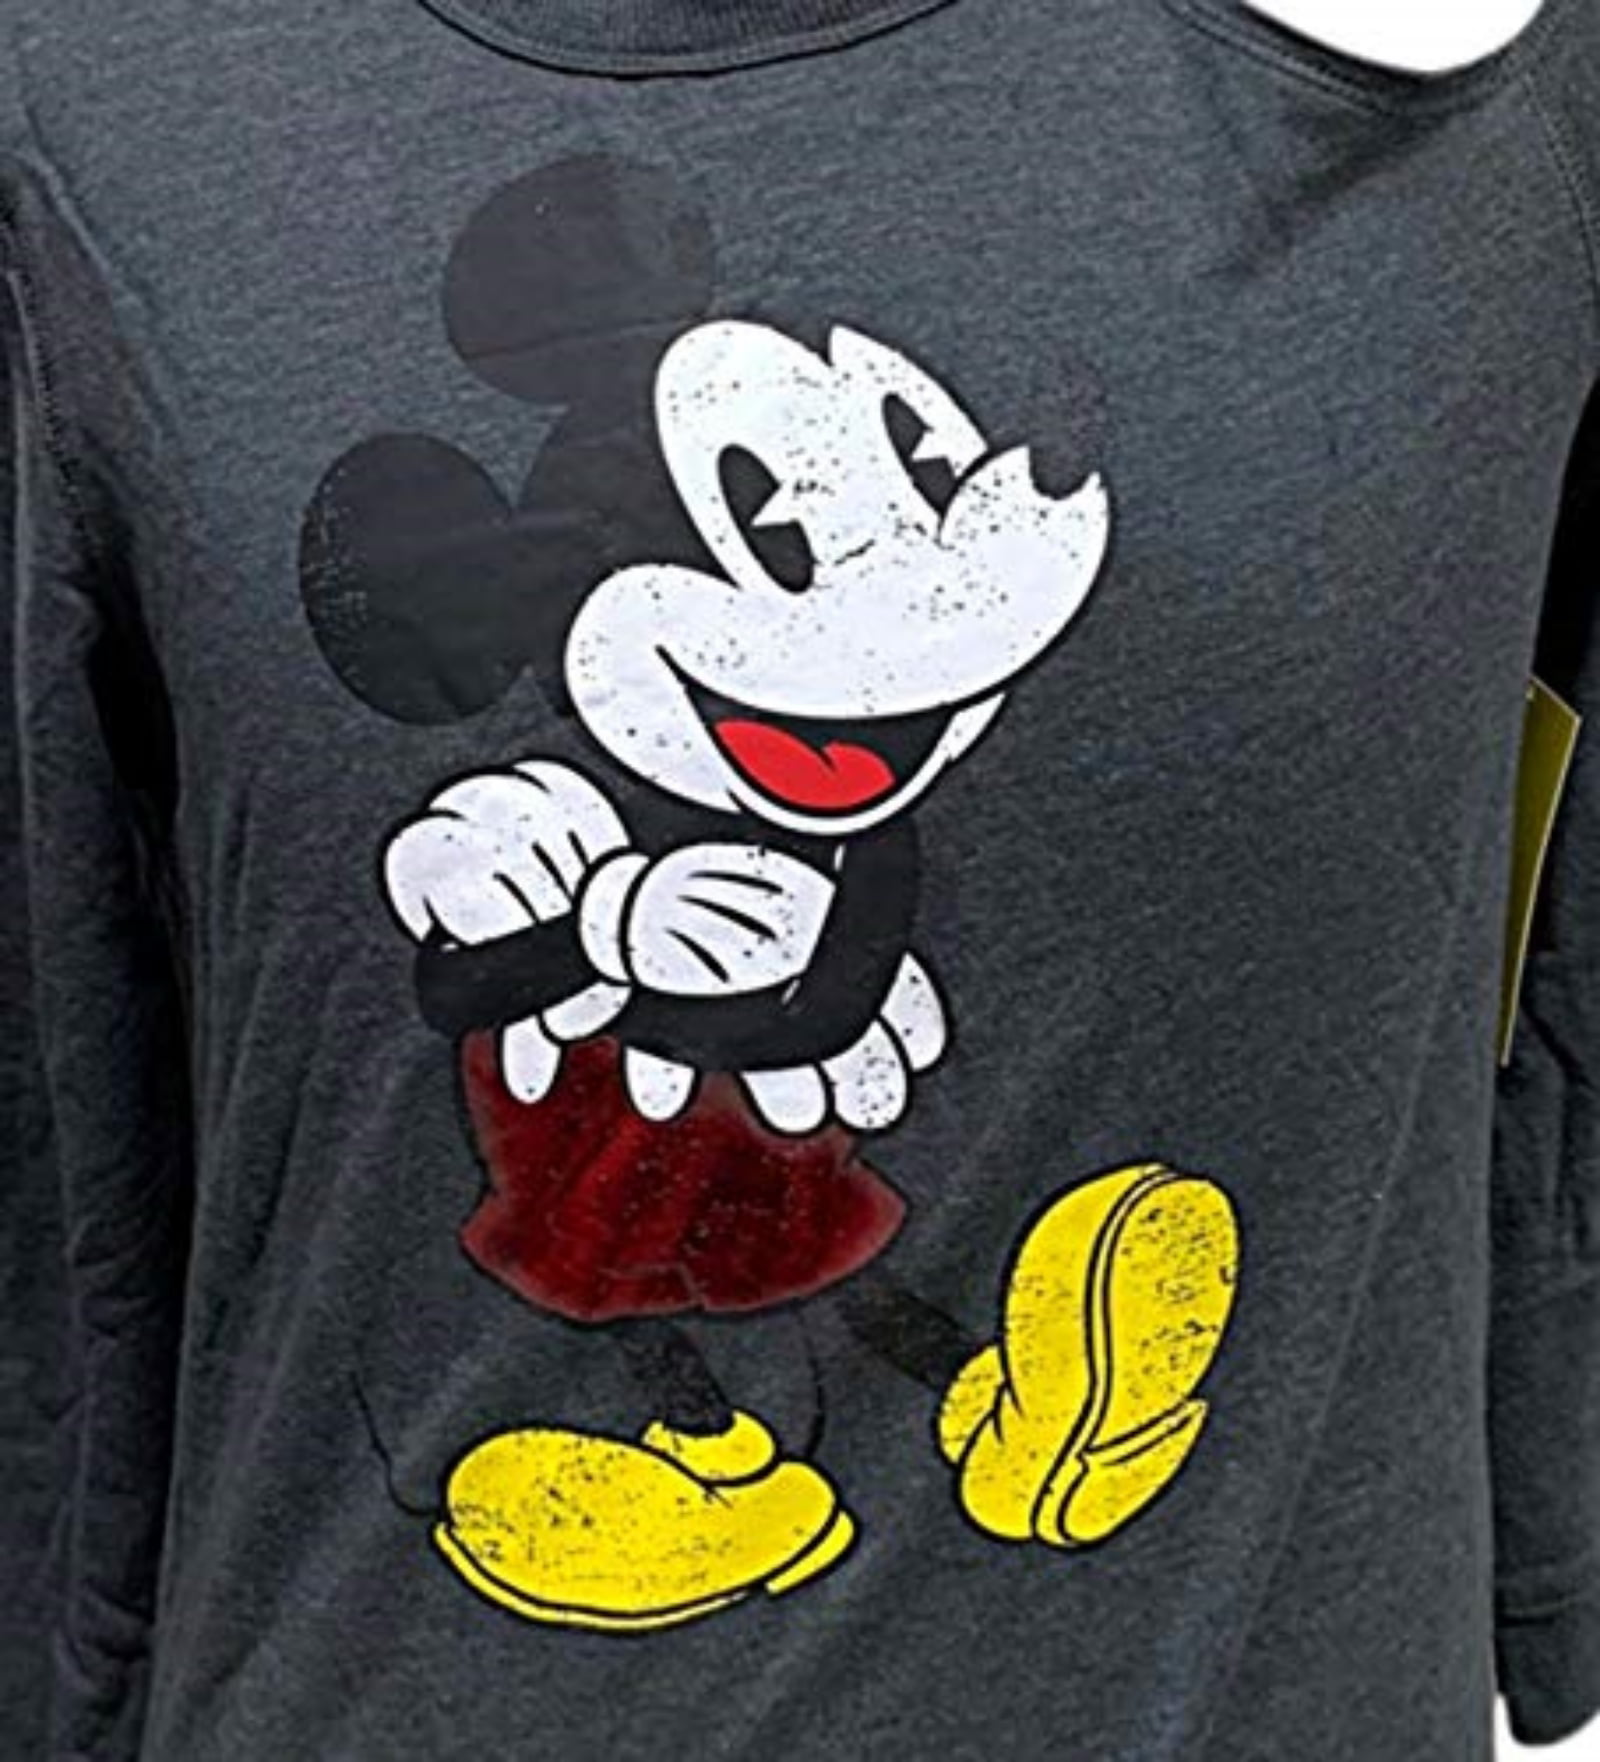 Disney Mickey Mouse Long Sleeve Pullover with Cut Out and Off The Shoulder Sweatshirt for Women Gray